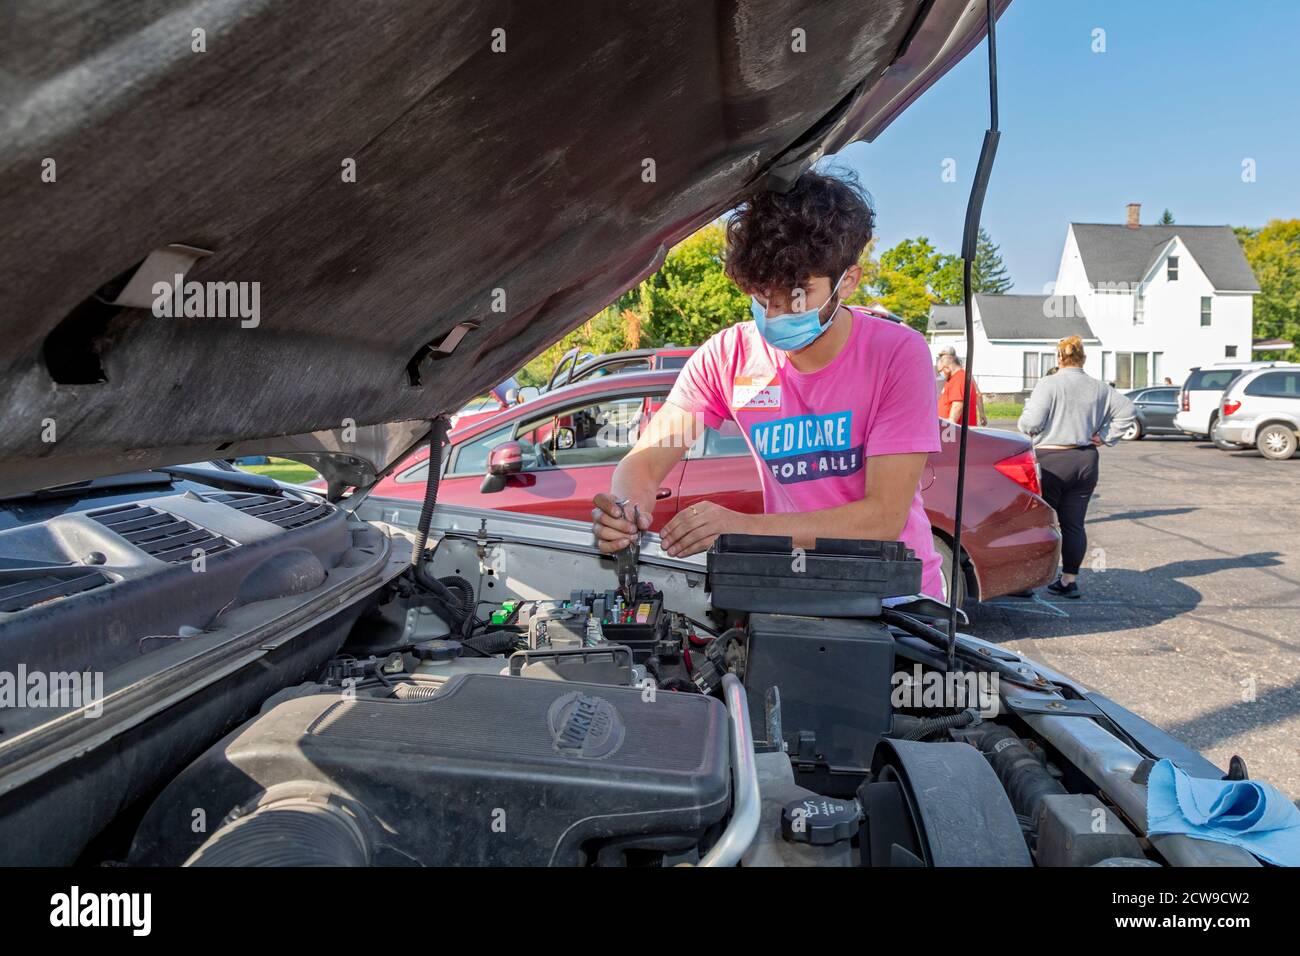 Ypsilanti, Michigan - Professional and amateur auto mechanics made free car repairs at a Pull Over Prevention Clinic. The event aimed to help communit Stock Photo